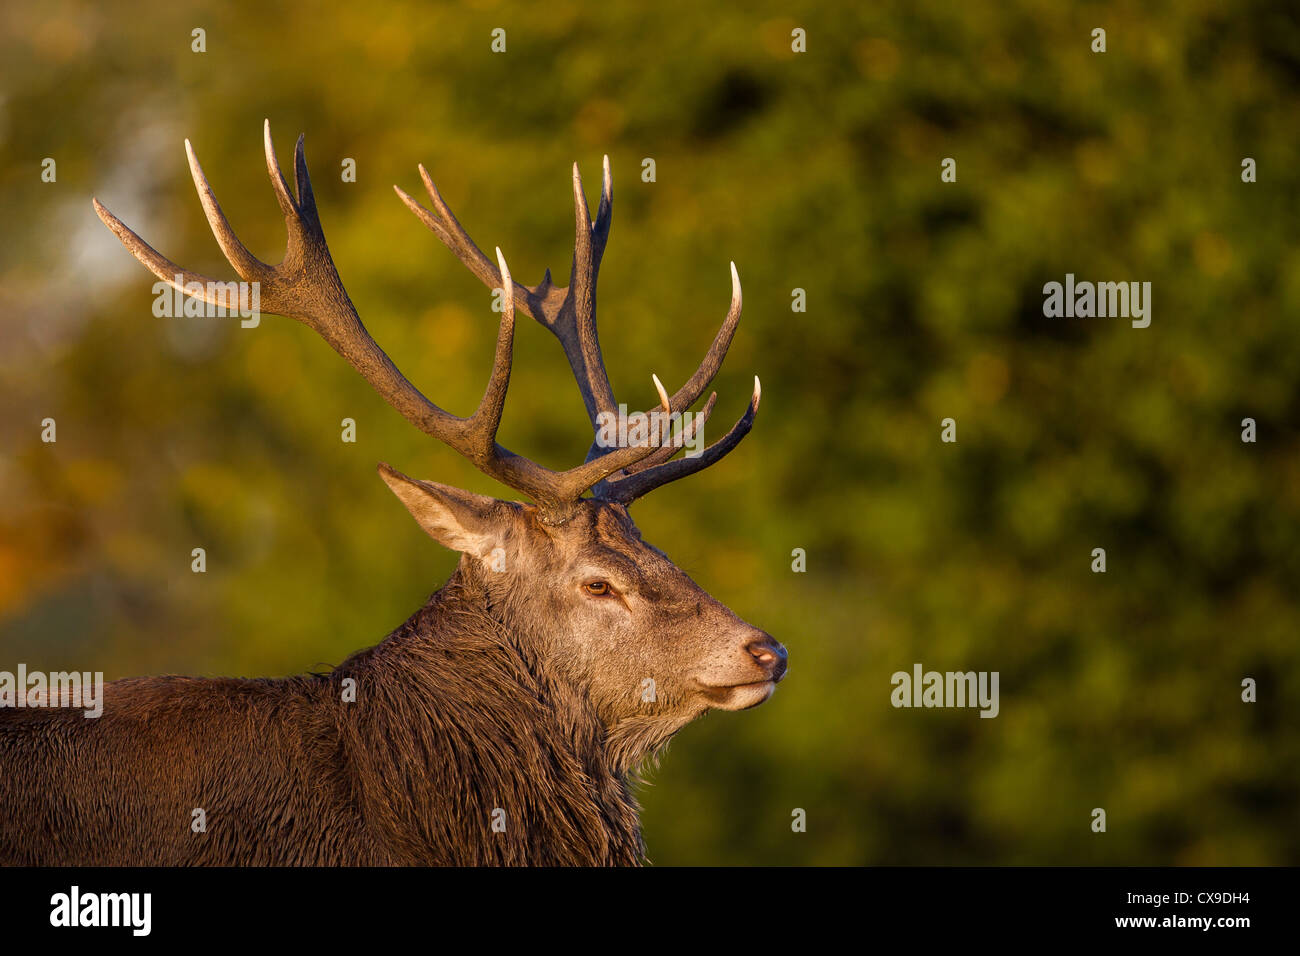 Red deer stag roaring loudy during the autumn rutting season where males compete for the attentions of females for mating rights Stock Photo